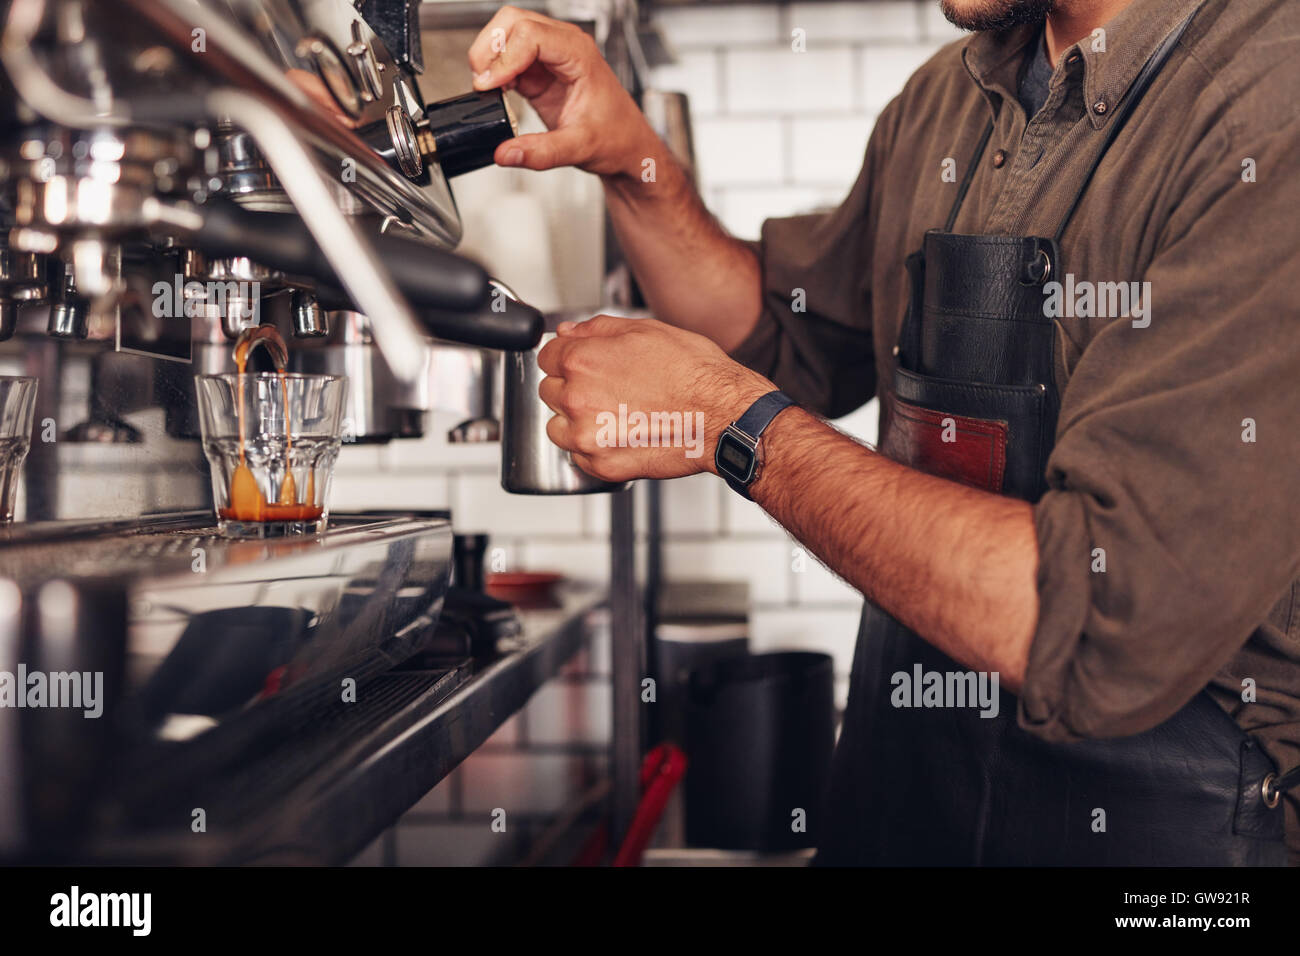 Cropped shot of barista using a coffee maker to prepare a cup of coffee. Cafe worker making a coffee. Stock Photo